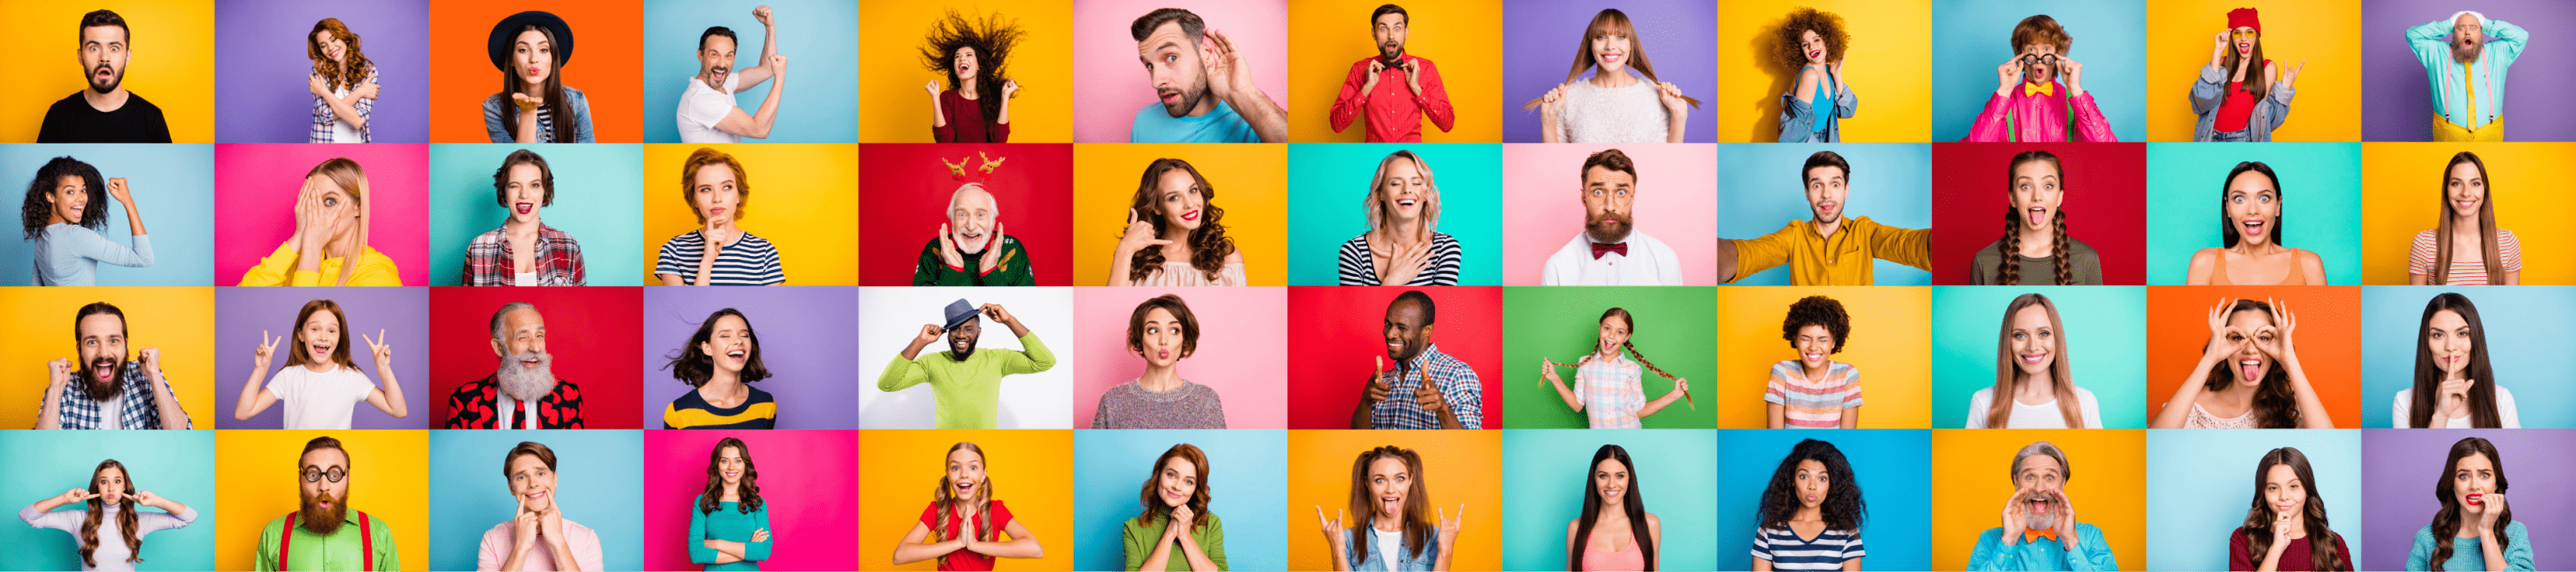 A collage of people with different facial expressions on colorful backgrounds